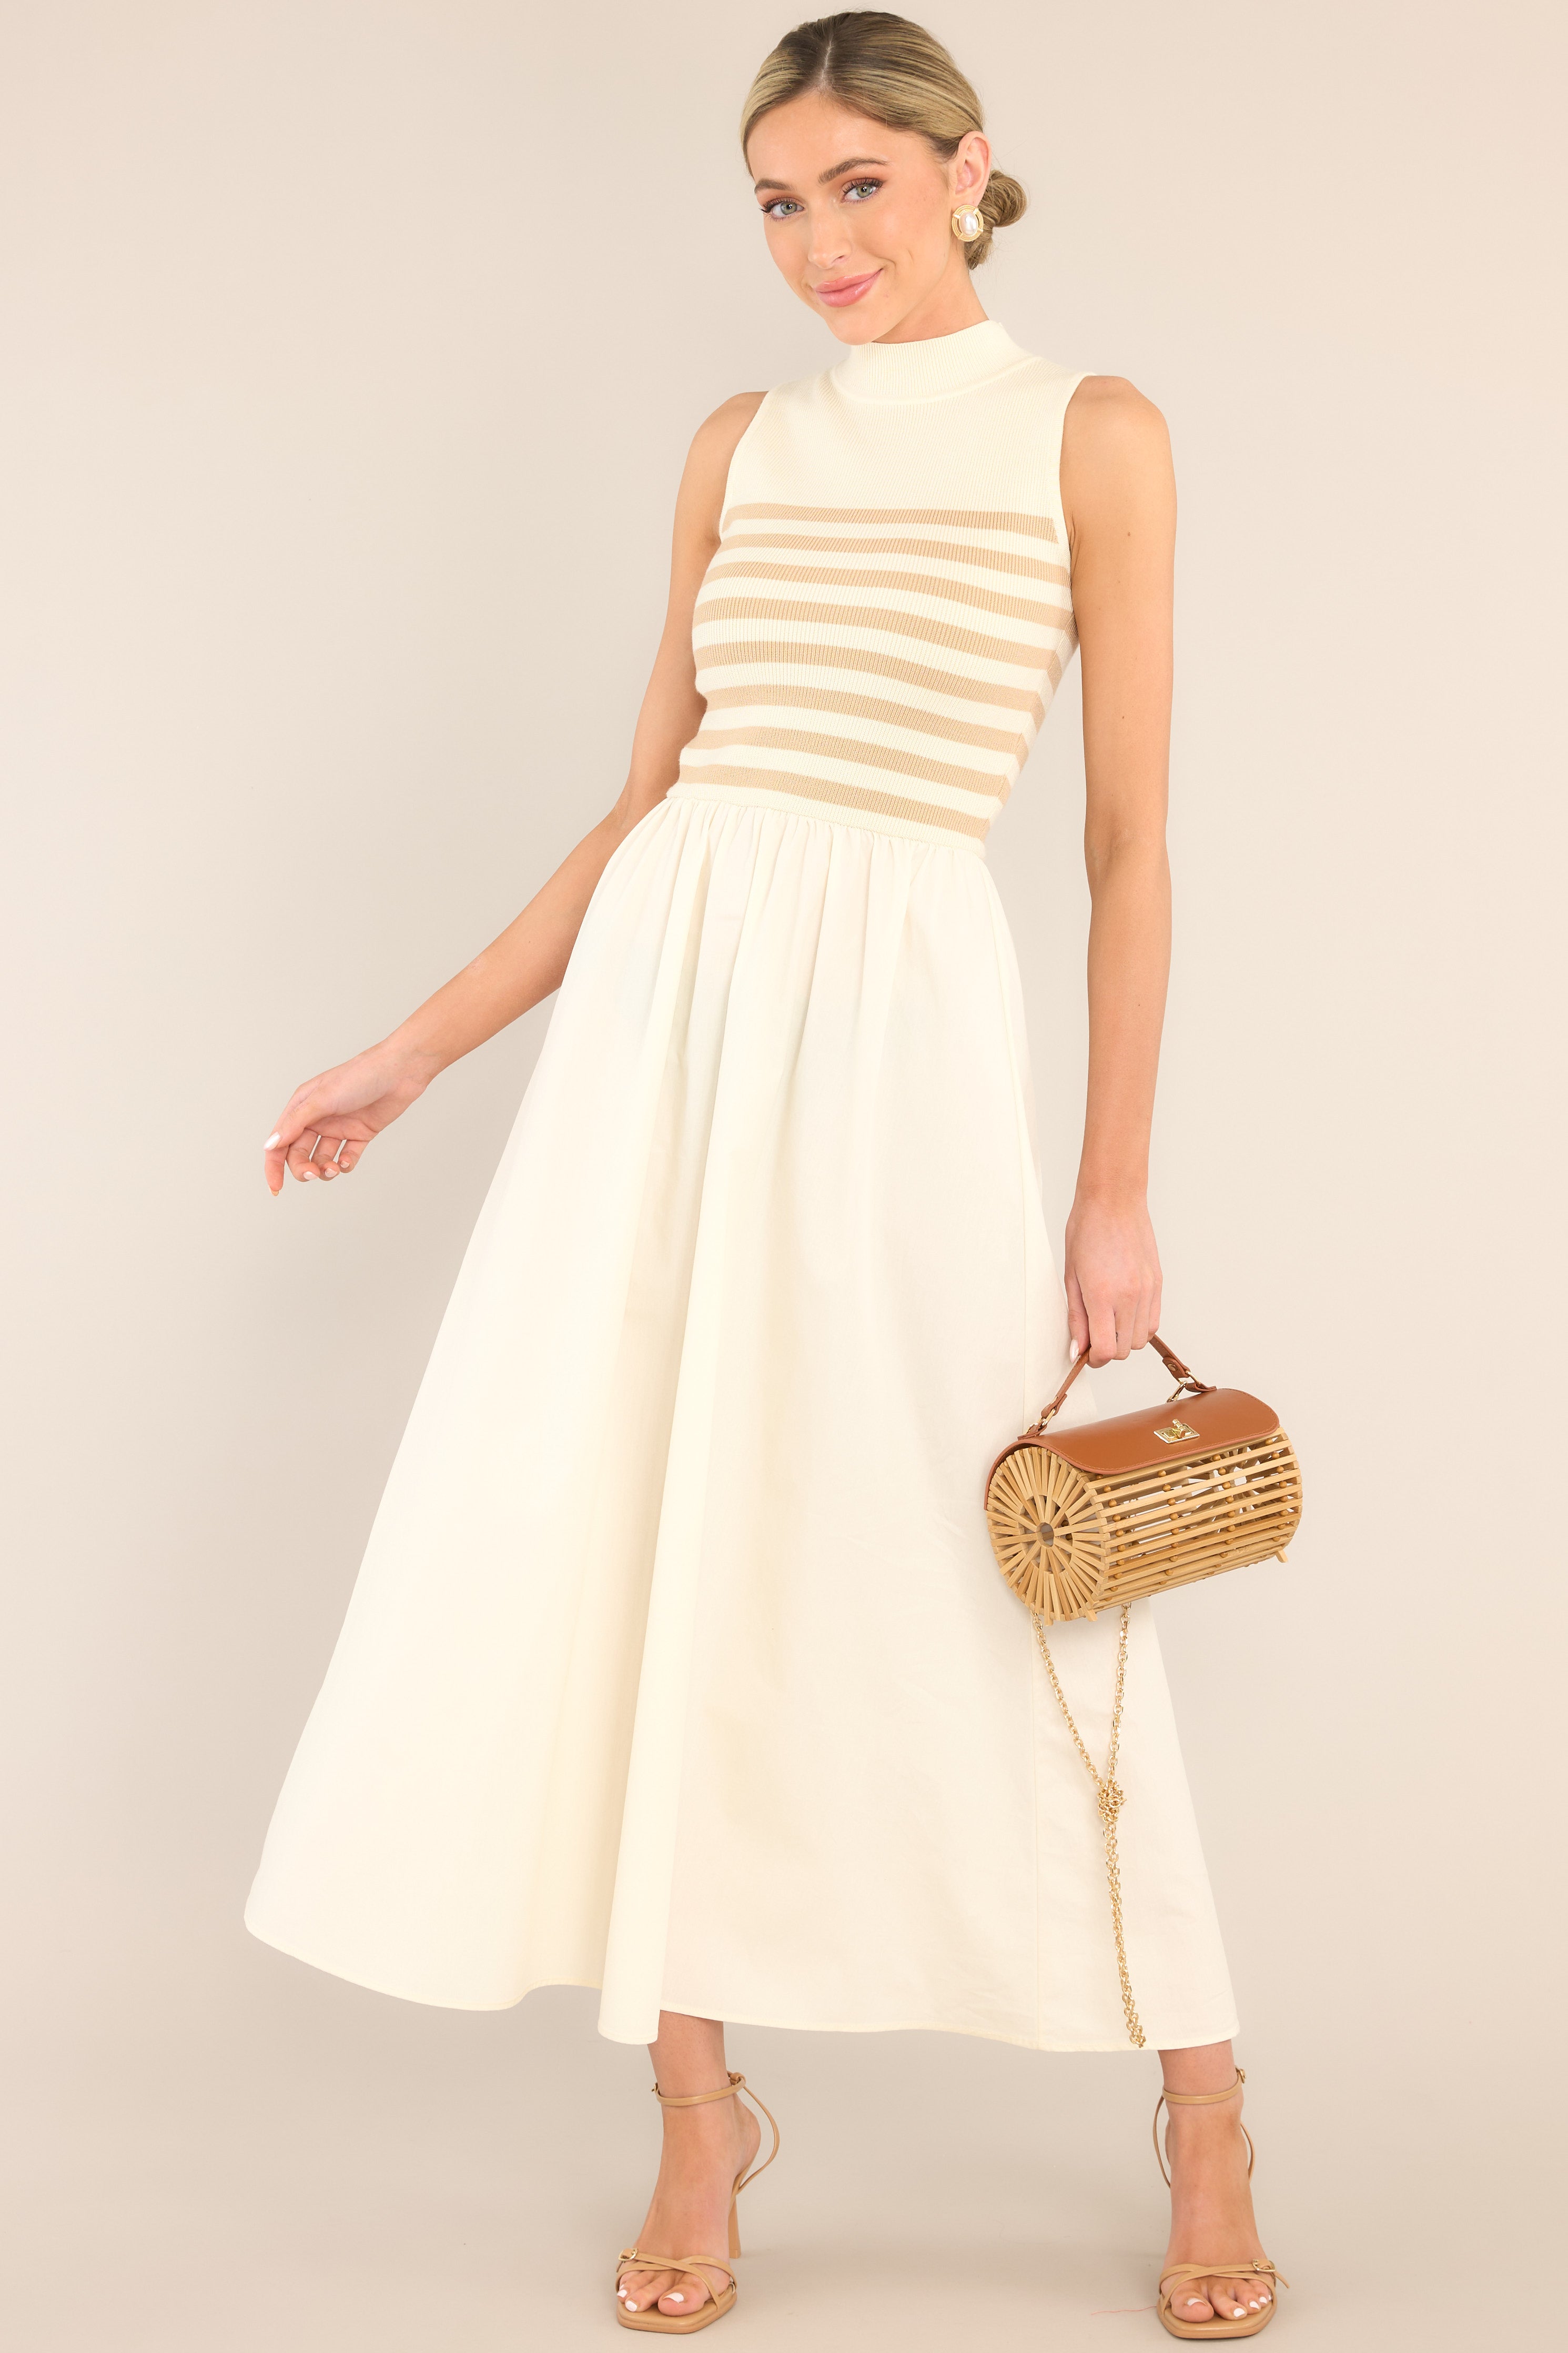 This tan and white dress features a high neckline, a striped sweater bodice, and a flowy skirt.